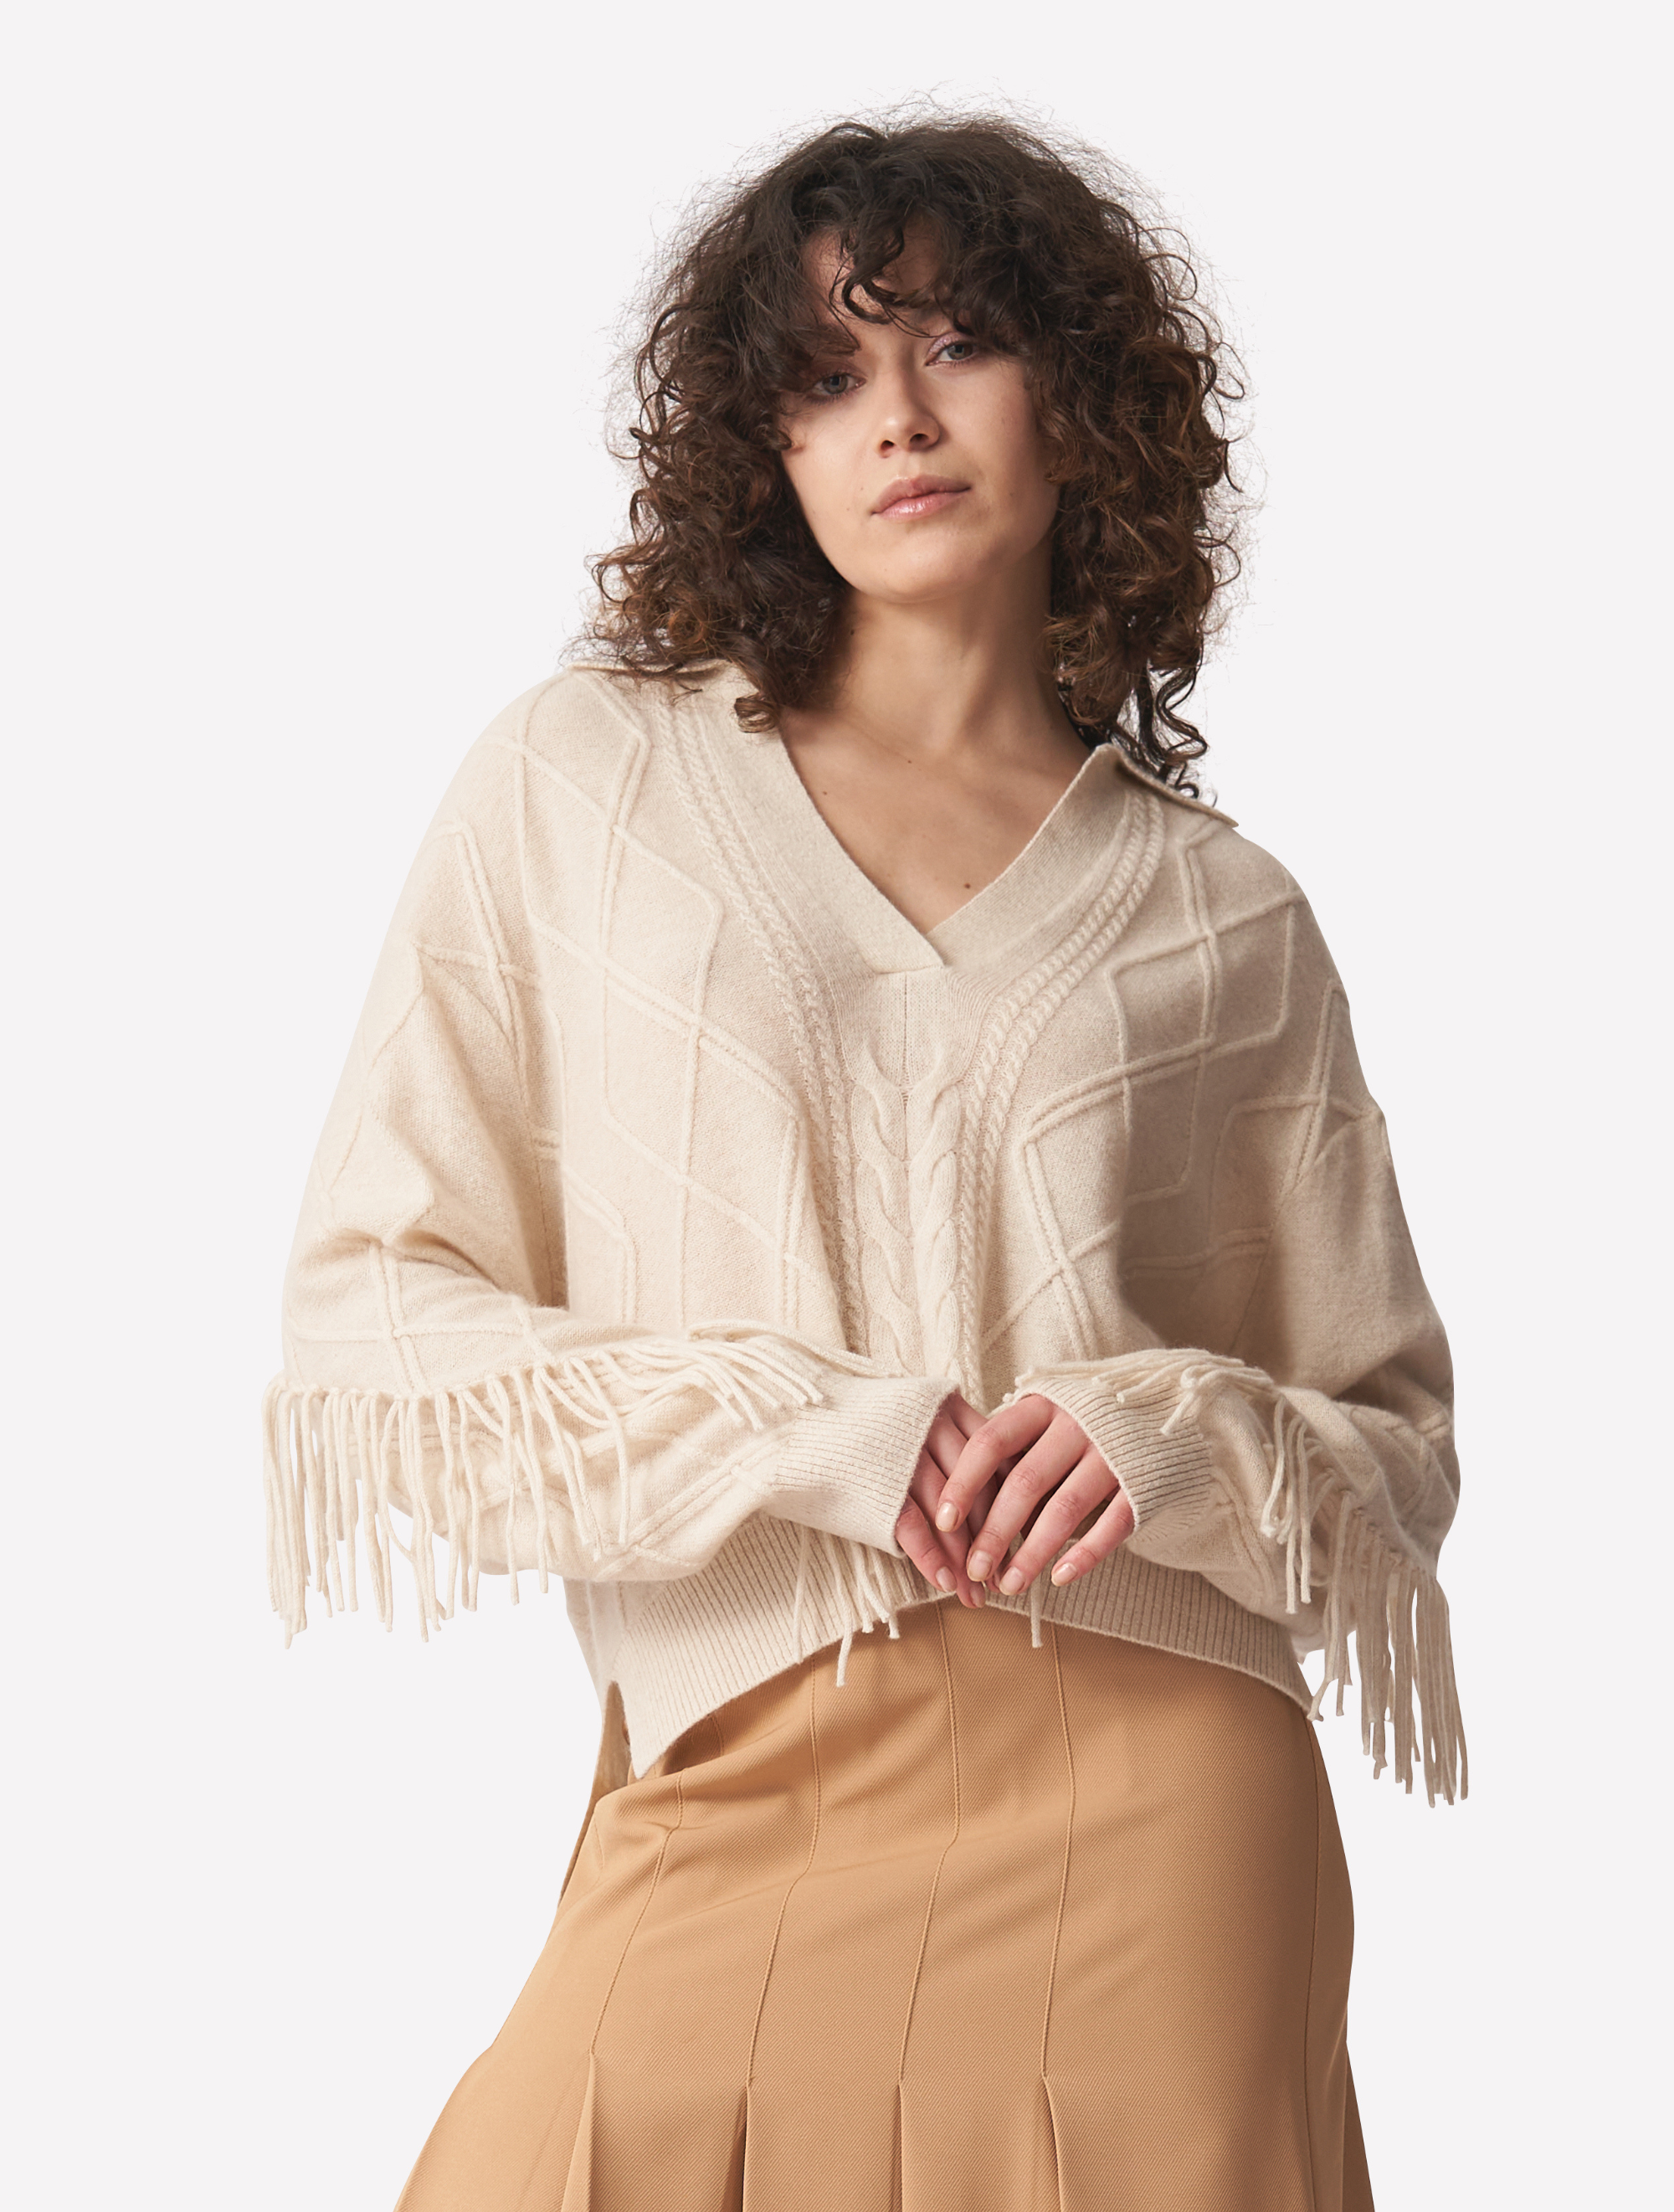 Ecru cashmere polo neck jumper with dropped shoulders cable knit and fringing details across arms and back